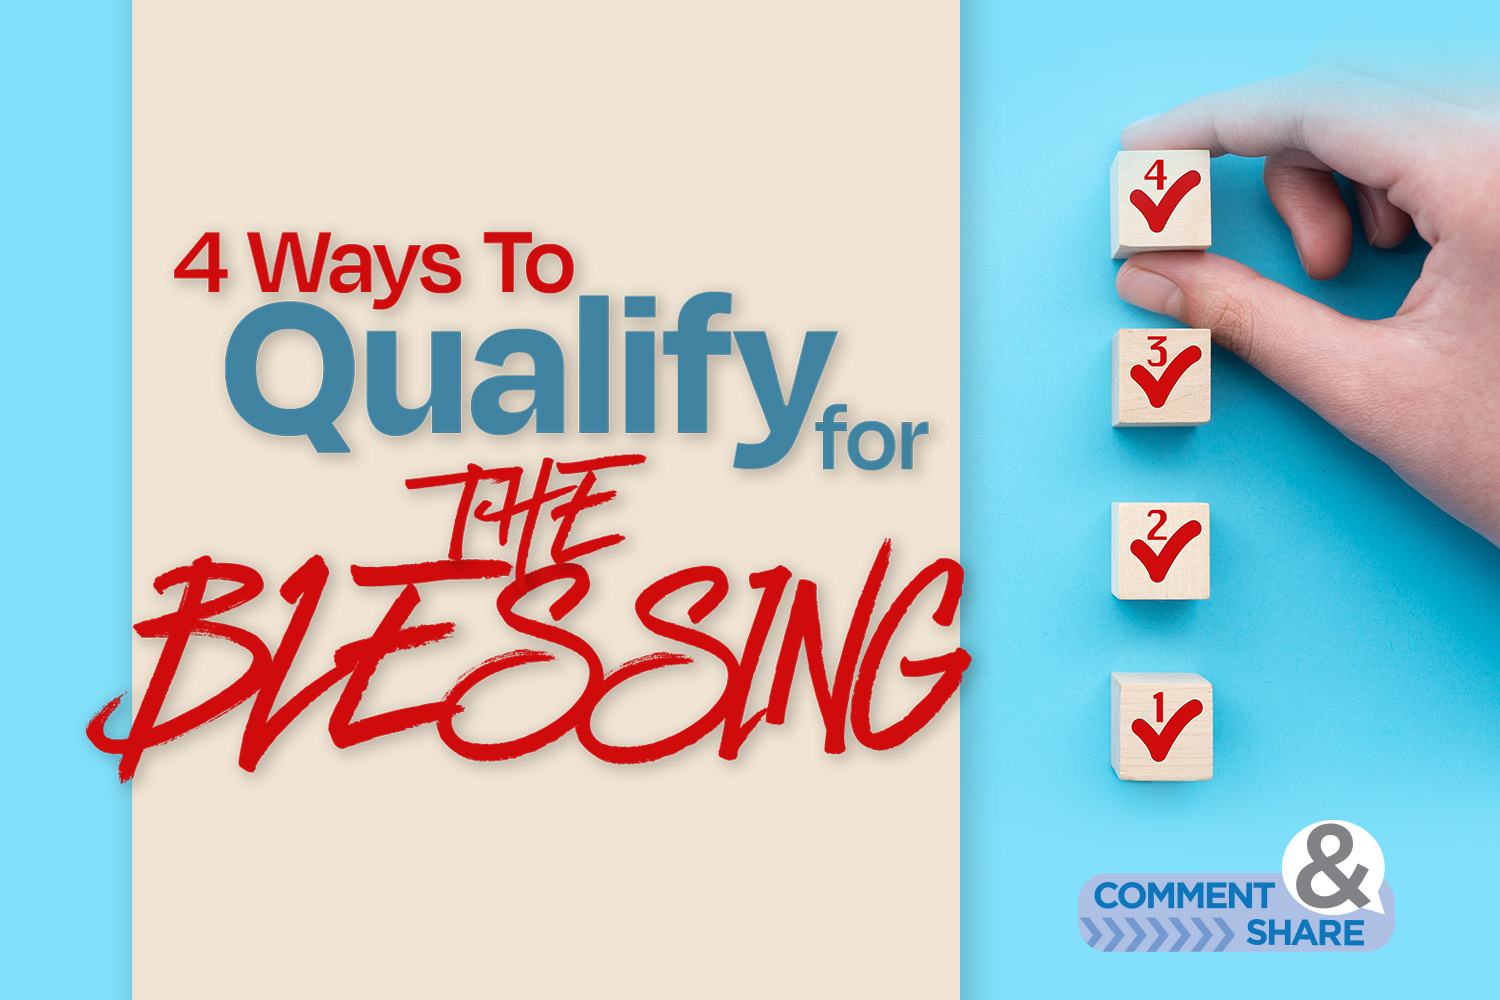 4 Ways To Qualify for THE BLESSING